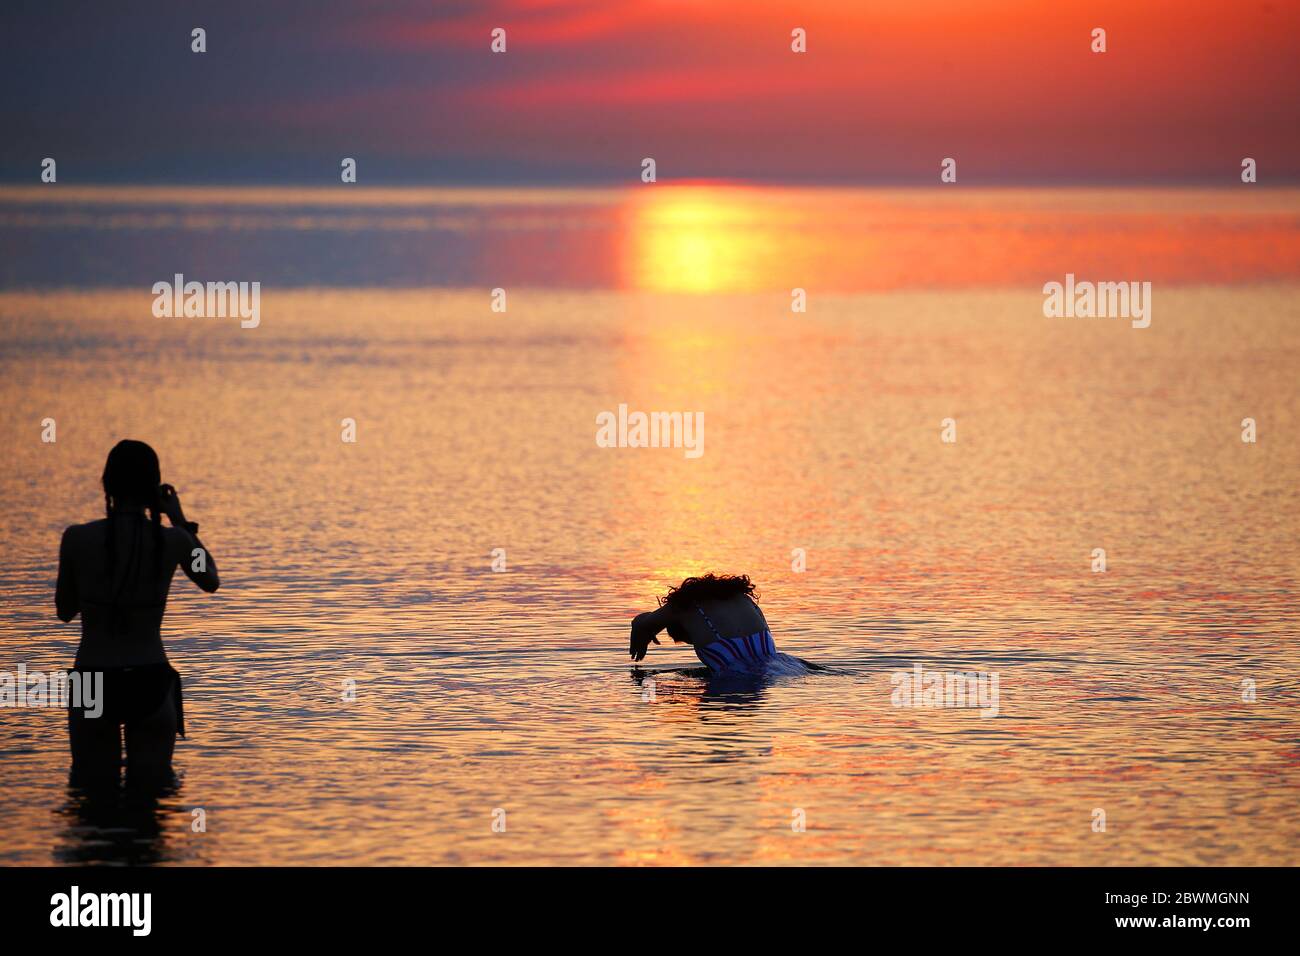 Members of the public enjoy the sun rise at Helen's bay, in Co. Down Northern Ireland, as they take a dip in the Irish Sea. Credit: Jonathan Porter/Alamy Live News Stock Photo